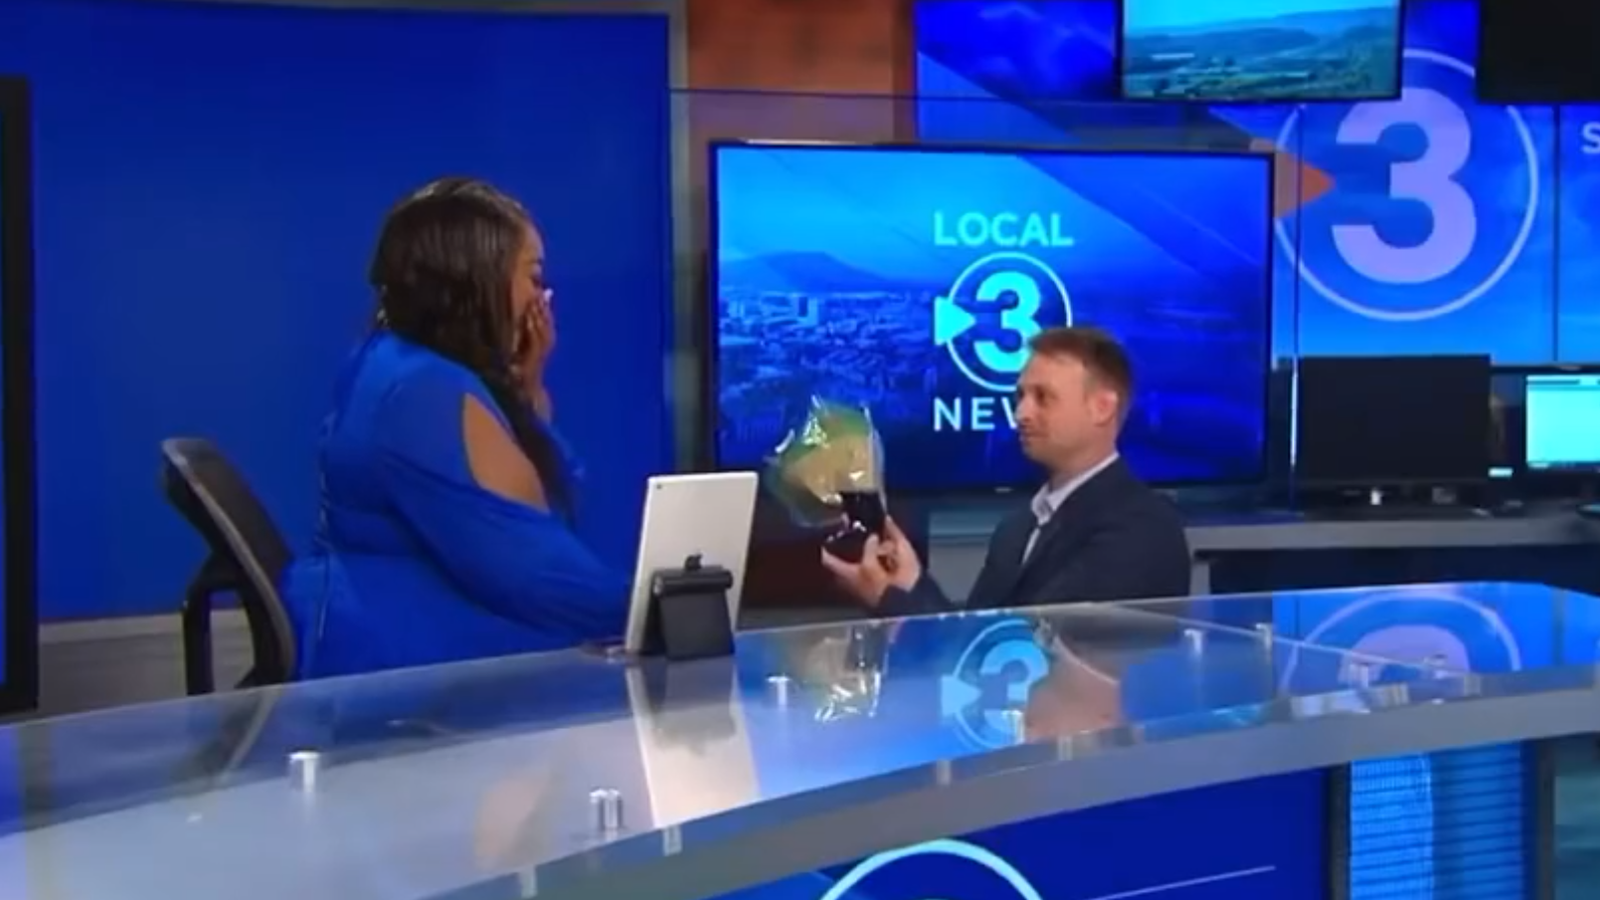 US TV news anchor Cornelia Nicholson unknowingly introduces her own marriage proposal on set